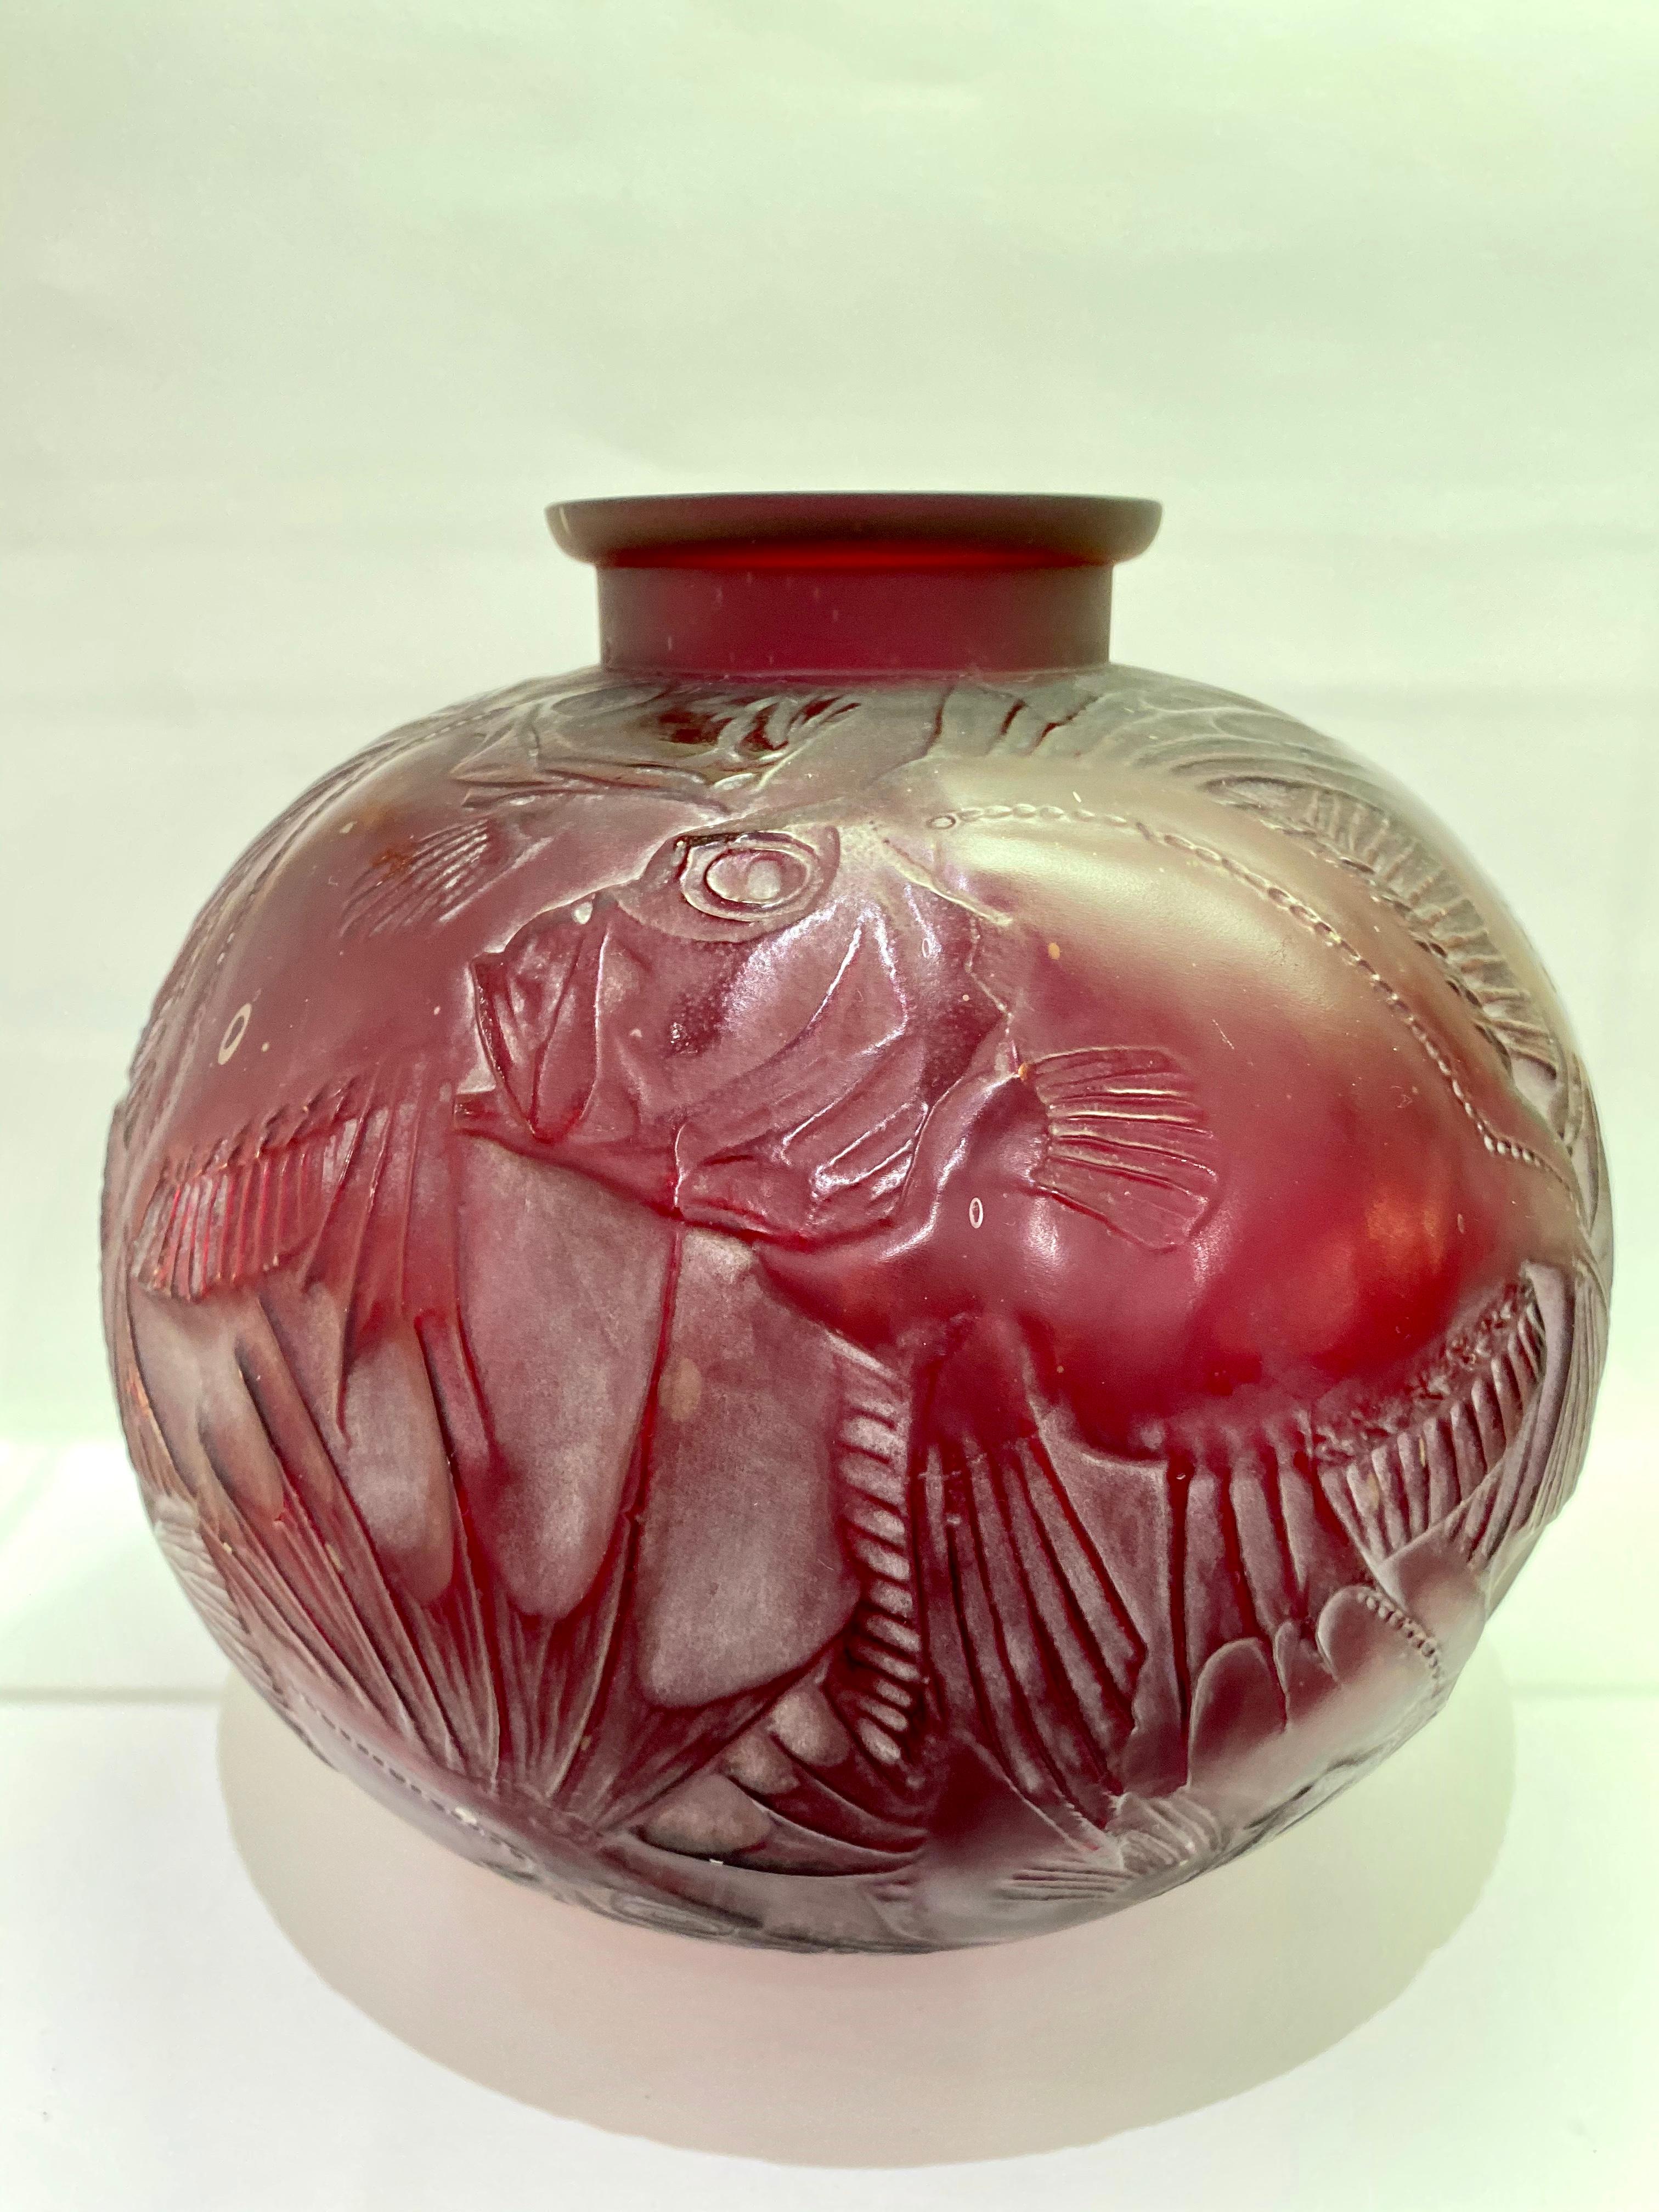 Molded 1921 René Lalique Poissons Vase Cased Red Cherry Glass